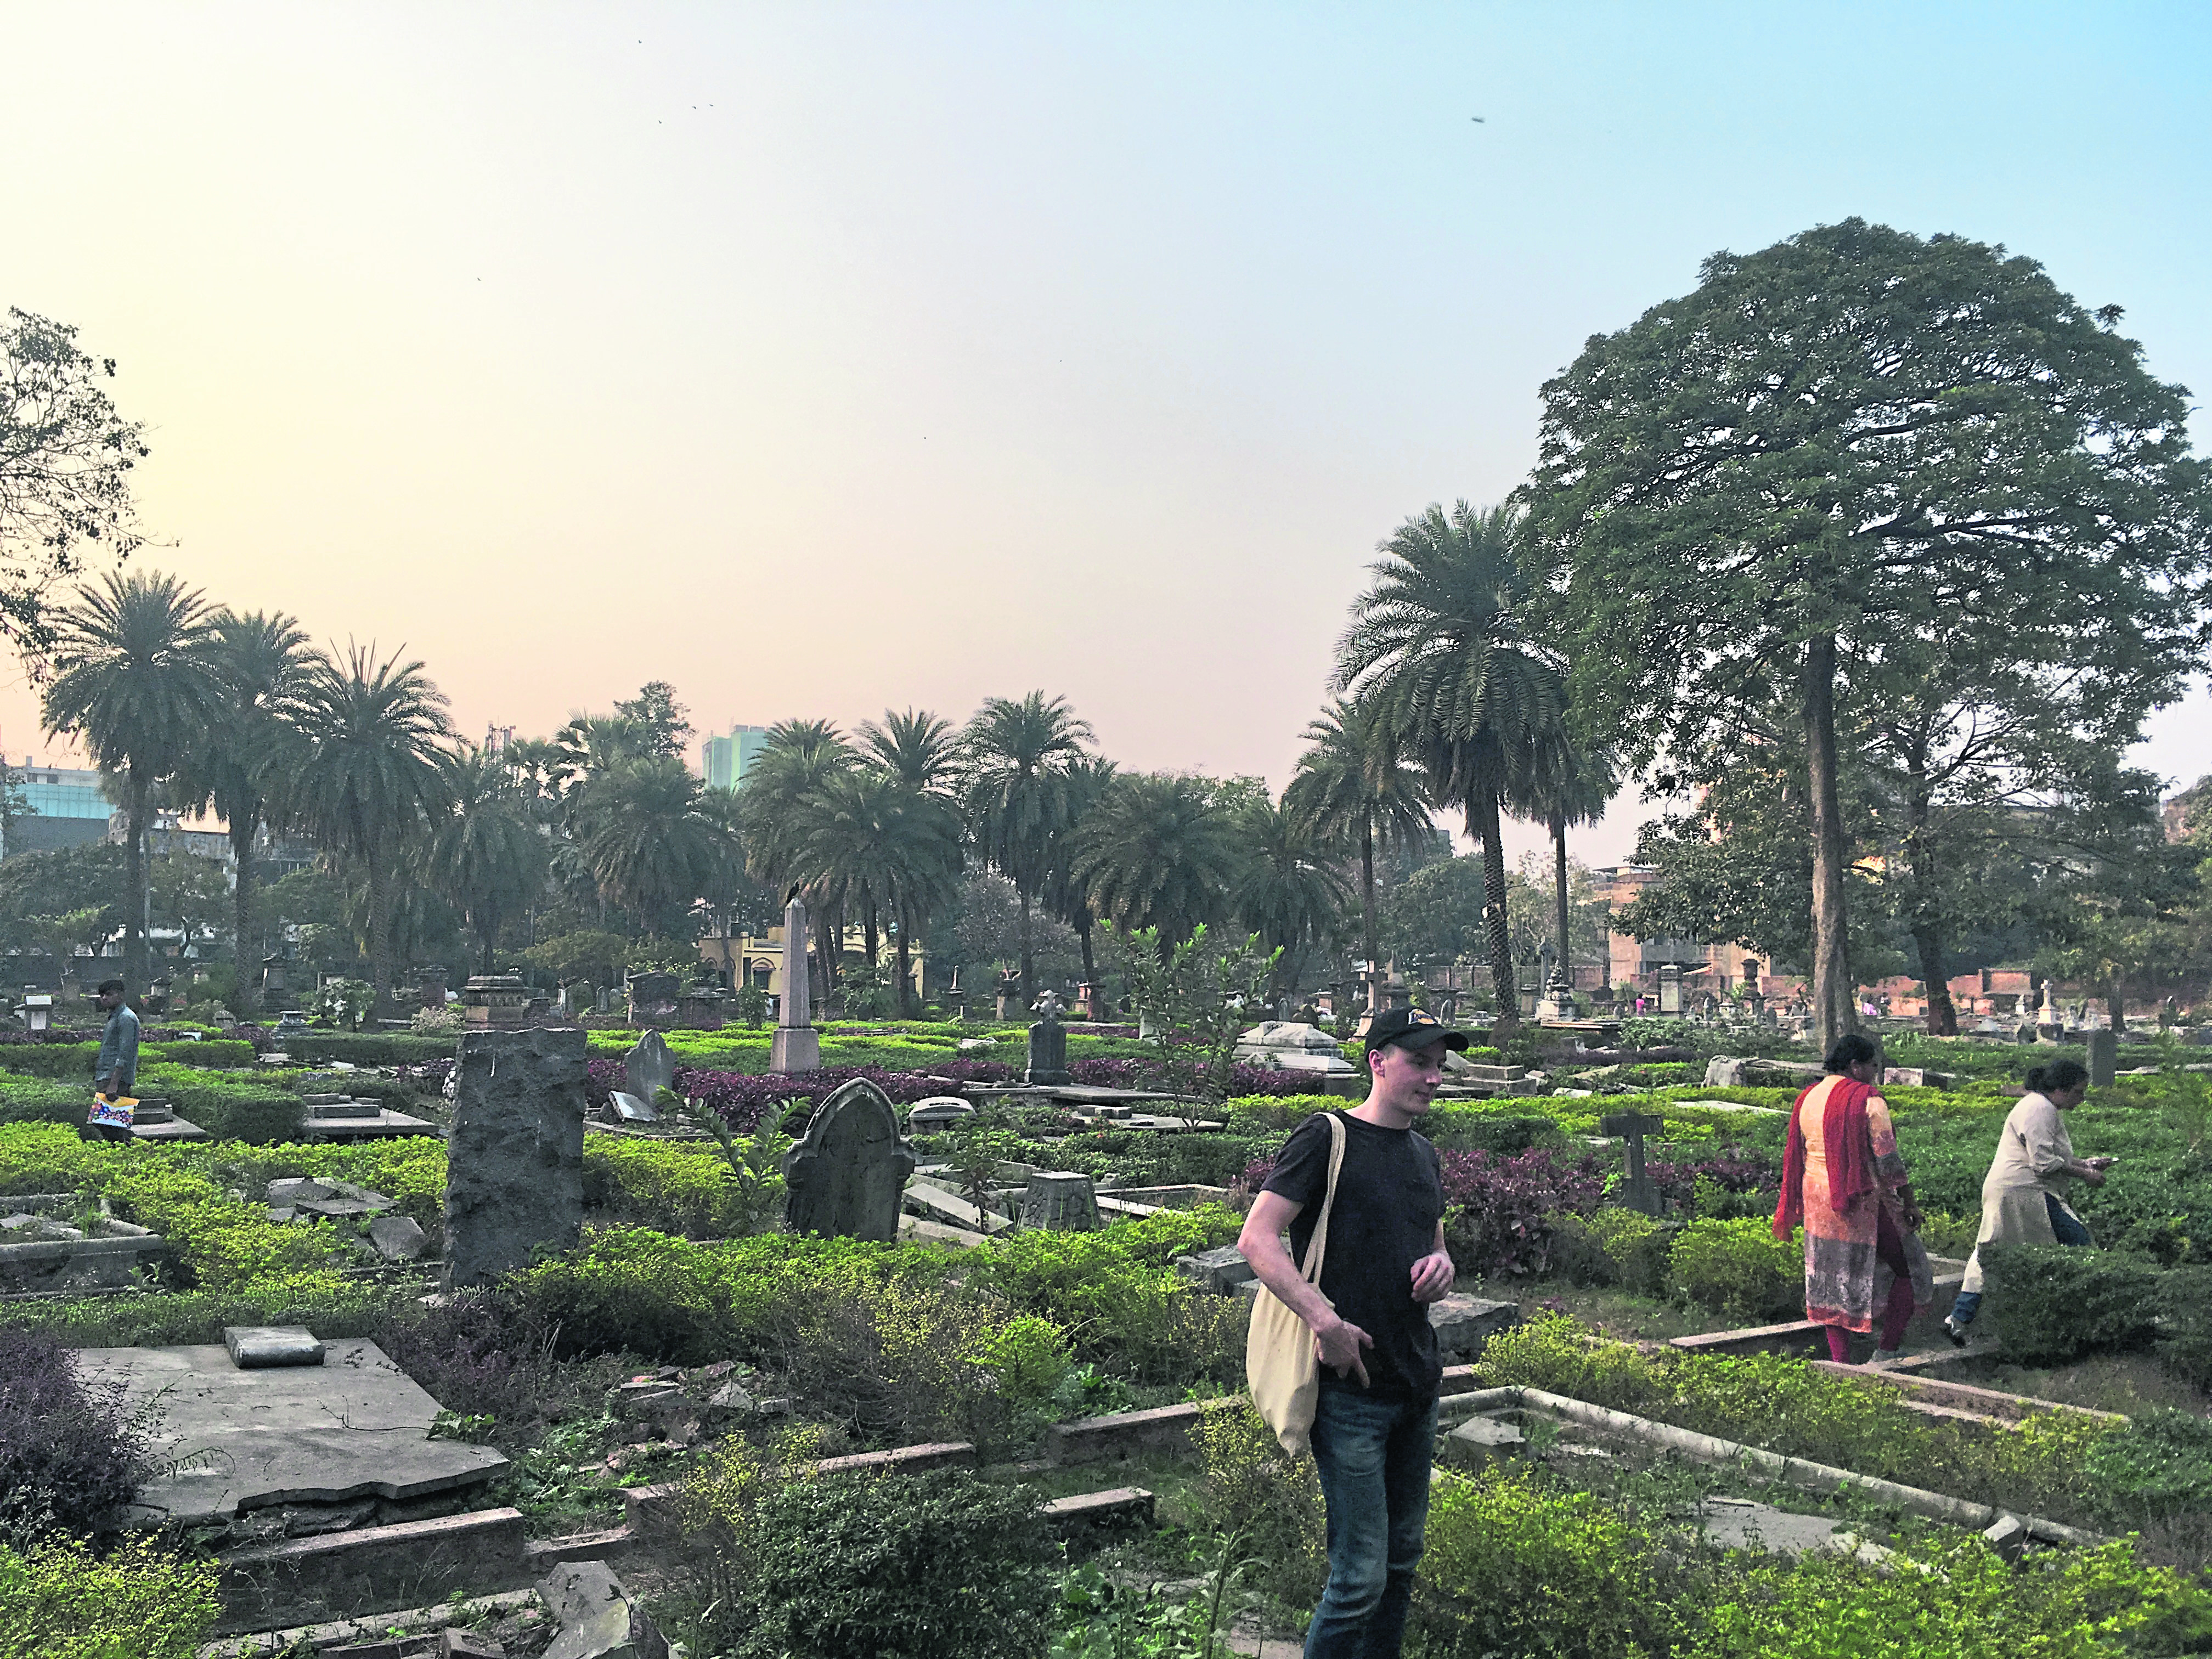 Scottish cemetery project in Kolkata, which has transformed the site.